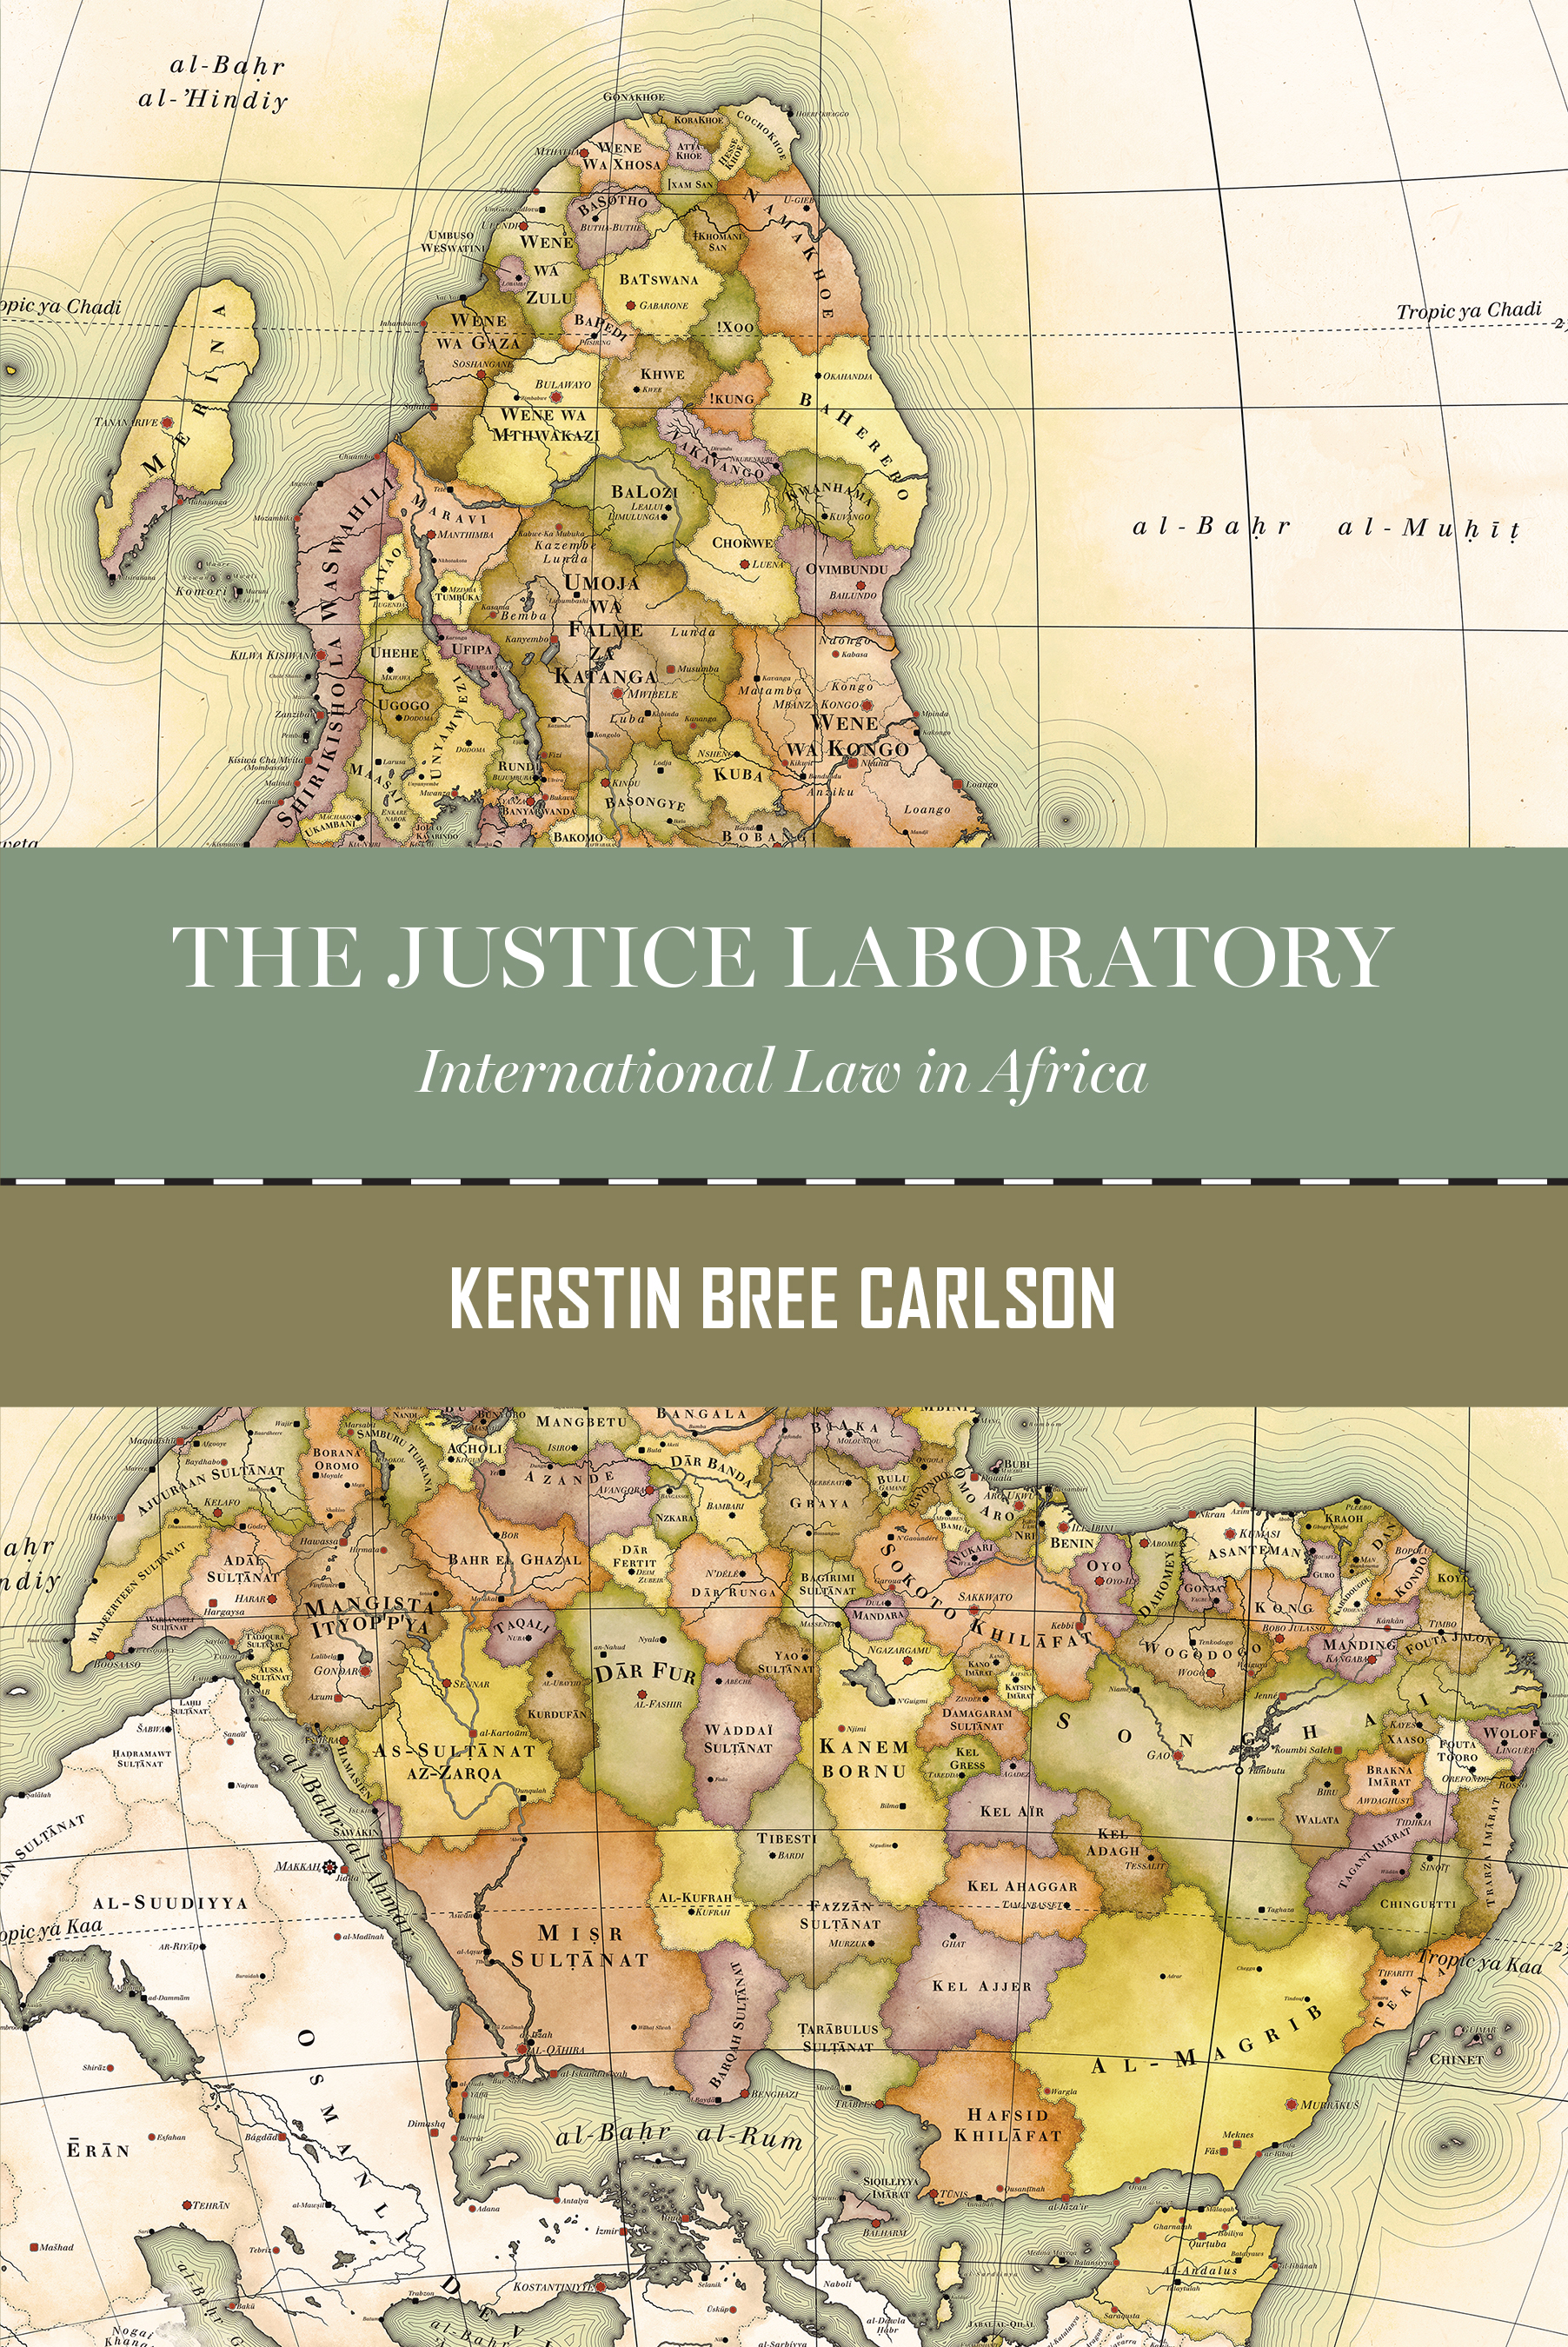 The Justice Laboratory: International Law in Africa